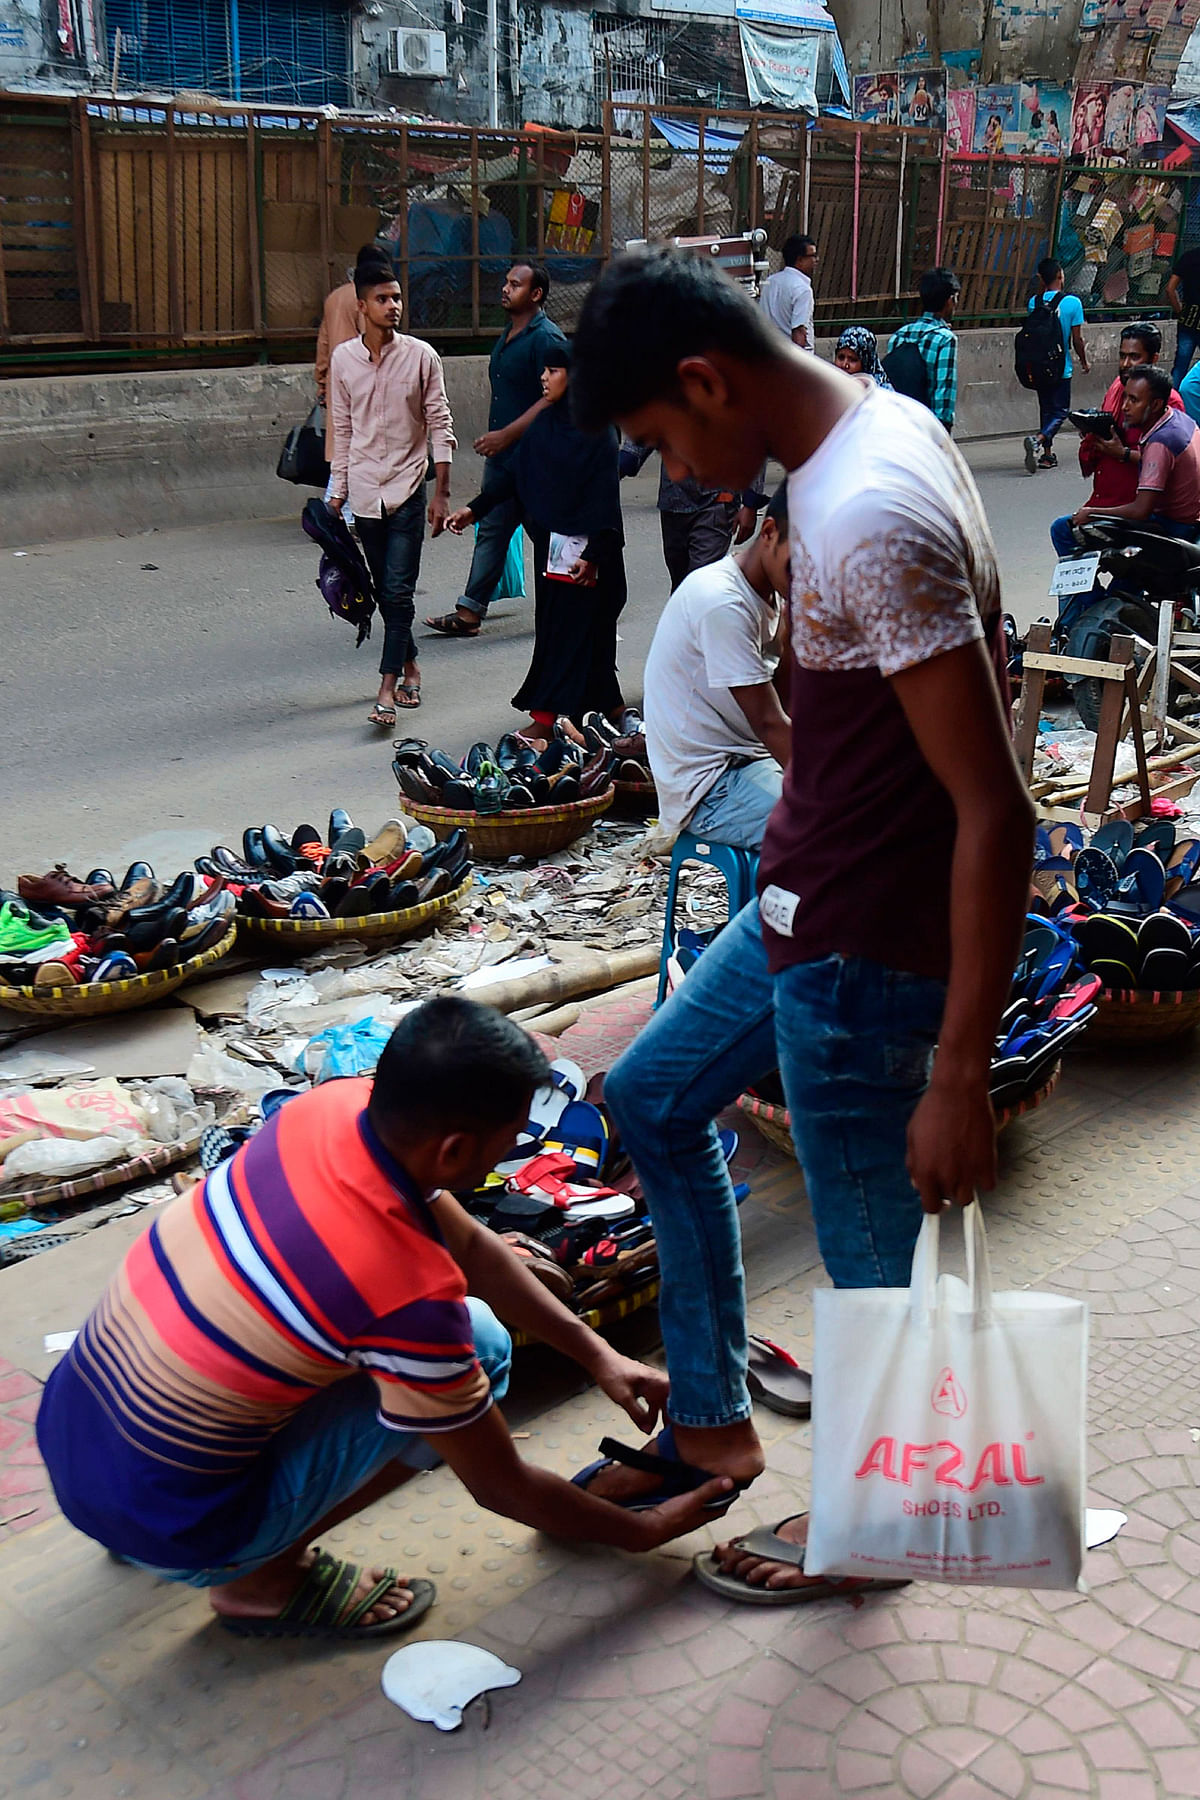 A Bangladeshi shopper tries on a shoe at a streetside shoe shop in Dhaka on 30 October 2019. Photo: AFP